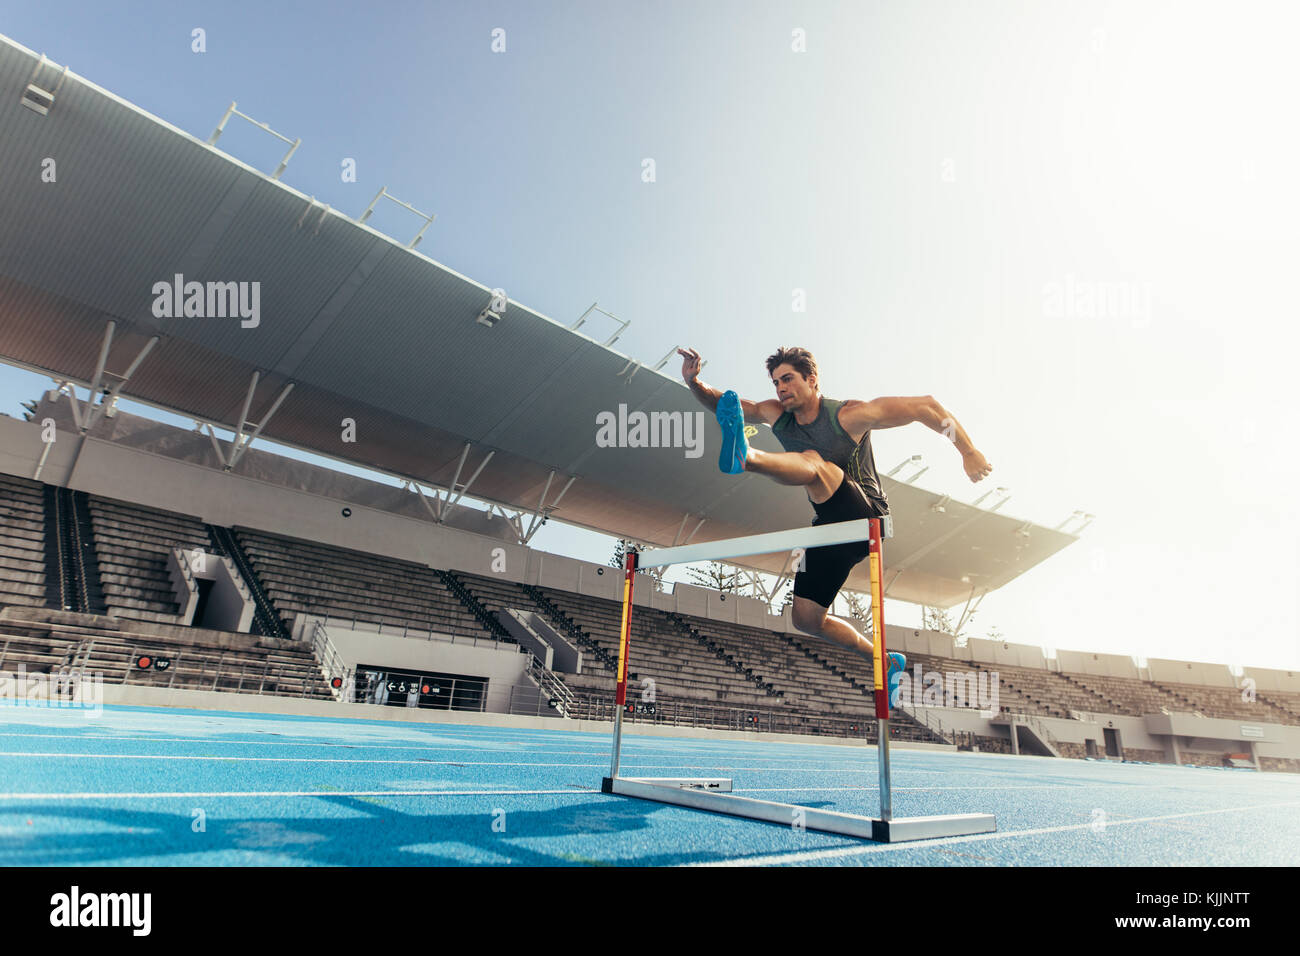 Runner jumping over an hurdle during track and field event. Athlete running a hurdle race in a stadium. Stock Photo